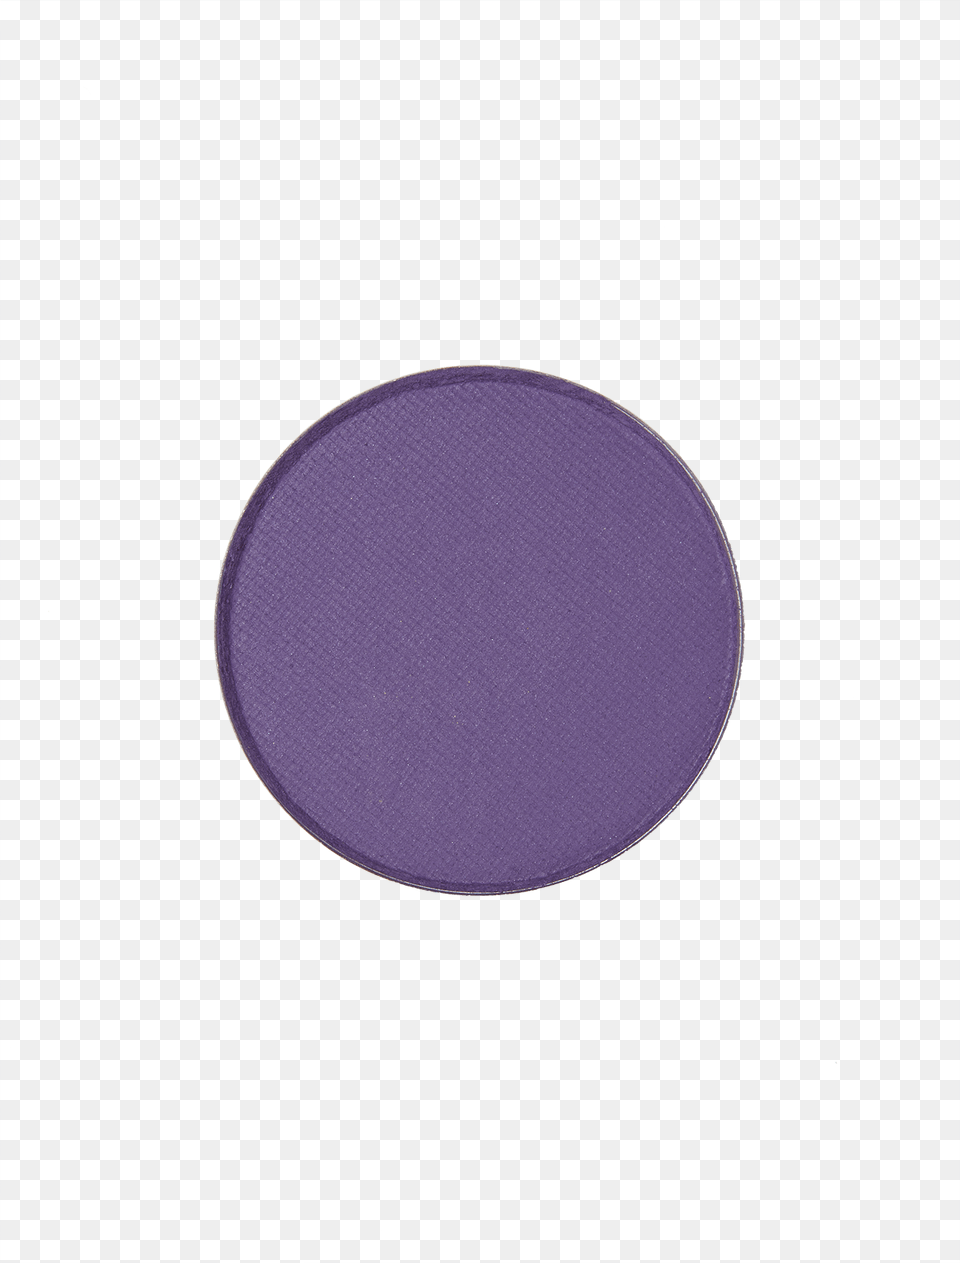 Felt Place Mats 35 Cm Round 5mm Thick Grey Set Of, Home Decor, Rug, Ping Pong, Ping Pong Paddle Png Image